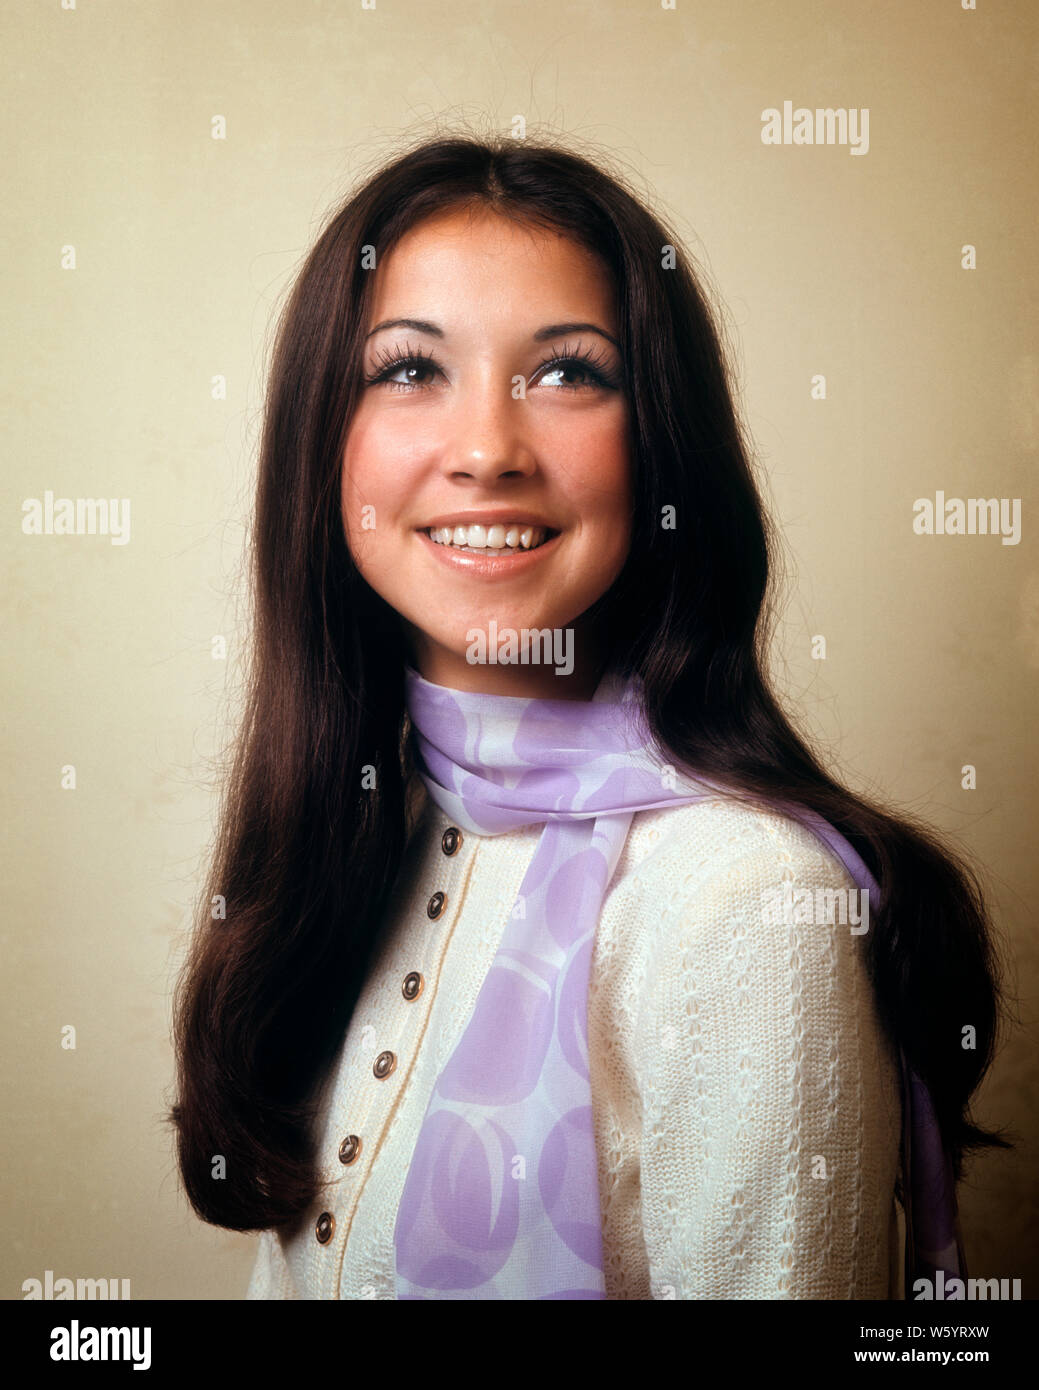 1970s PORTRAIT OF PRETTY SMILING TEEN GIRL WITH LONG BLACK HAIR WEARING WHITE SWEATER WITH LILAC SCARF GREAT EYE MAKEUP MASCARA - kg4650 HAR001 HARS STUDIO SHOT HEALTHINESS HOME LIFE COPY SPACE HALF-LENGTH MAKEUP PERSONS TEENAGE GIRL CONFIDENCE BRUNETTE PRETTY HAPPINESS CHEERFUL PRIDE SMILES JOYFUL LONG HAIR STYLISH TEENAGED BLACK HAIR BROWN EYES JUVENILES LILAC LOOKING UP MASCARA CAUCASIAN ETHNICITY HAR001 OLD FASHIONED Stock Photo